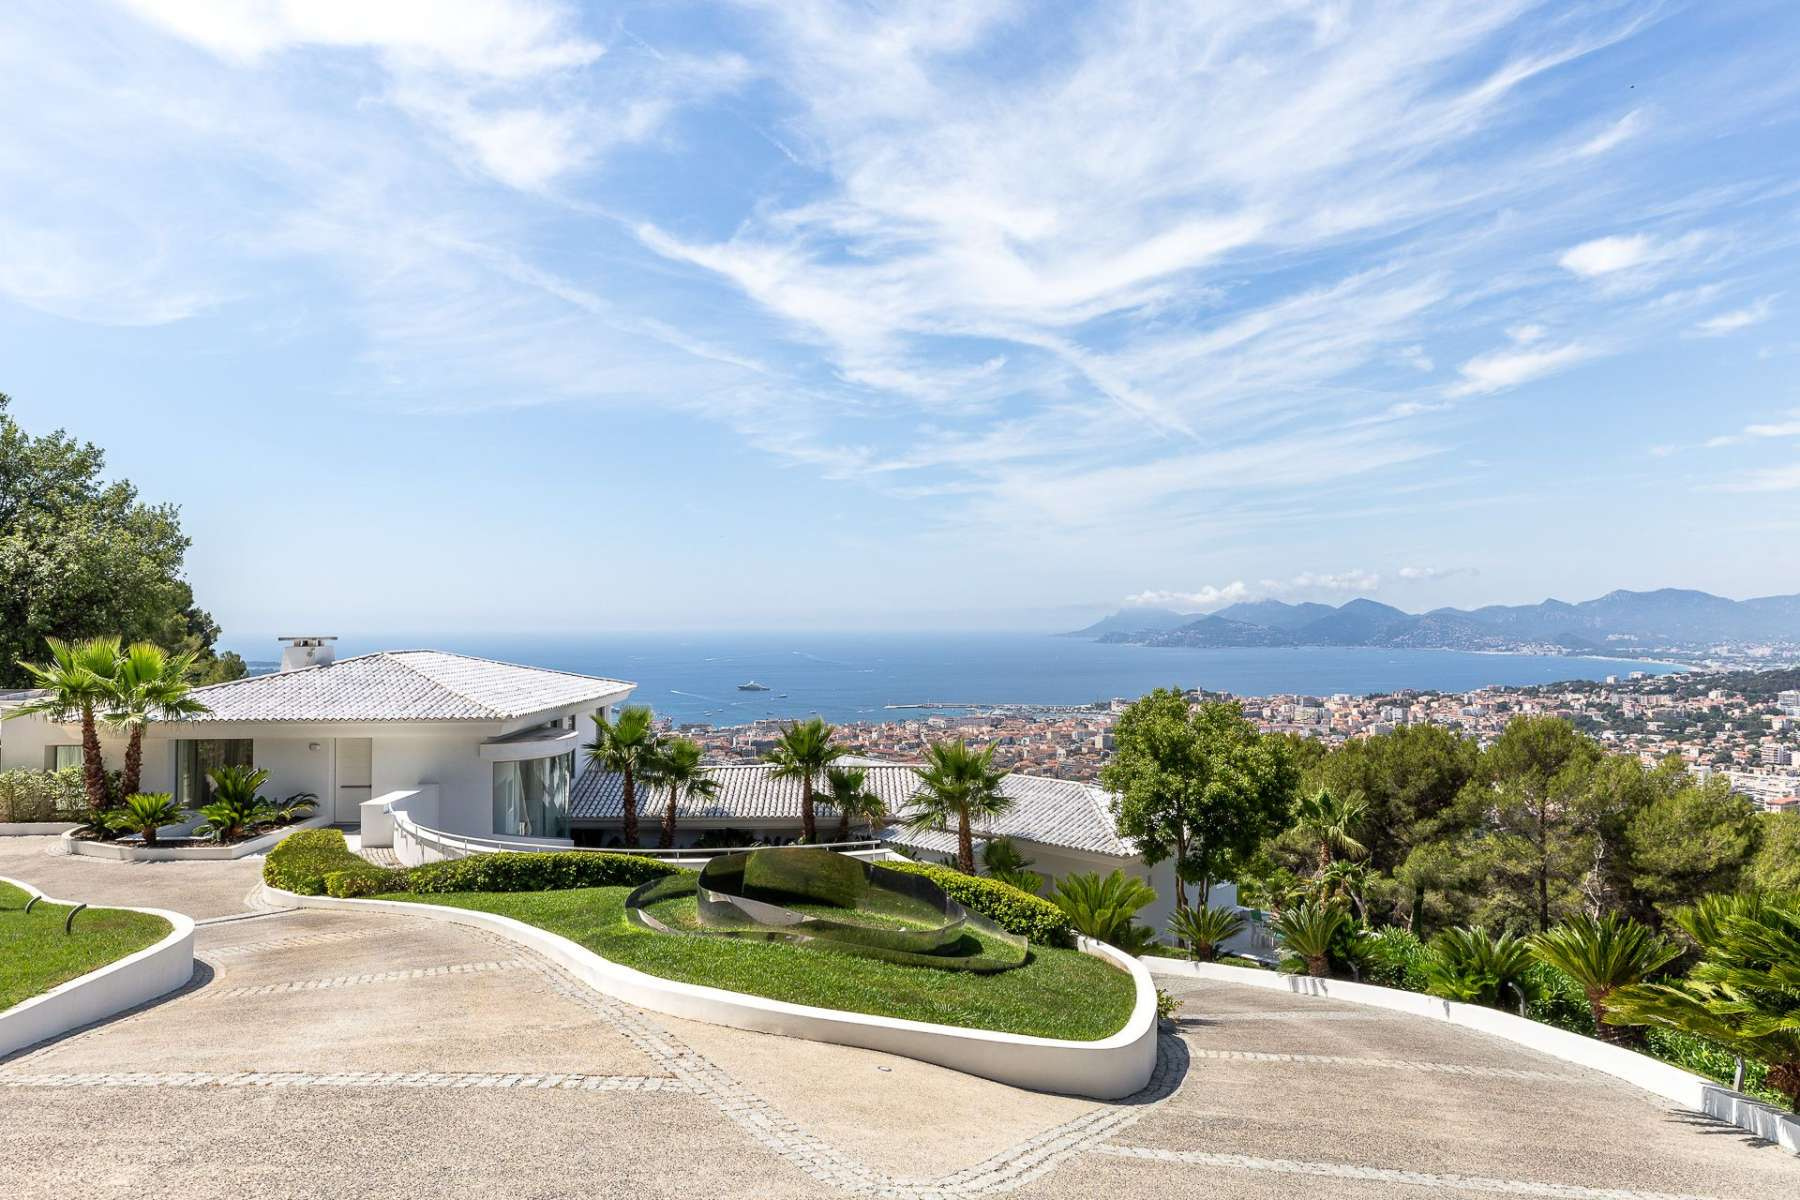 Cannes Hills Luxury Estate with Panoramic Views and Vast Gardens